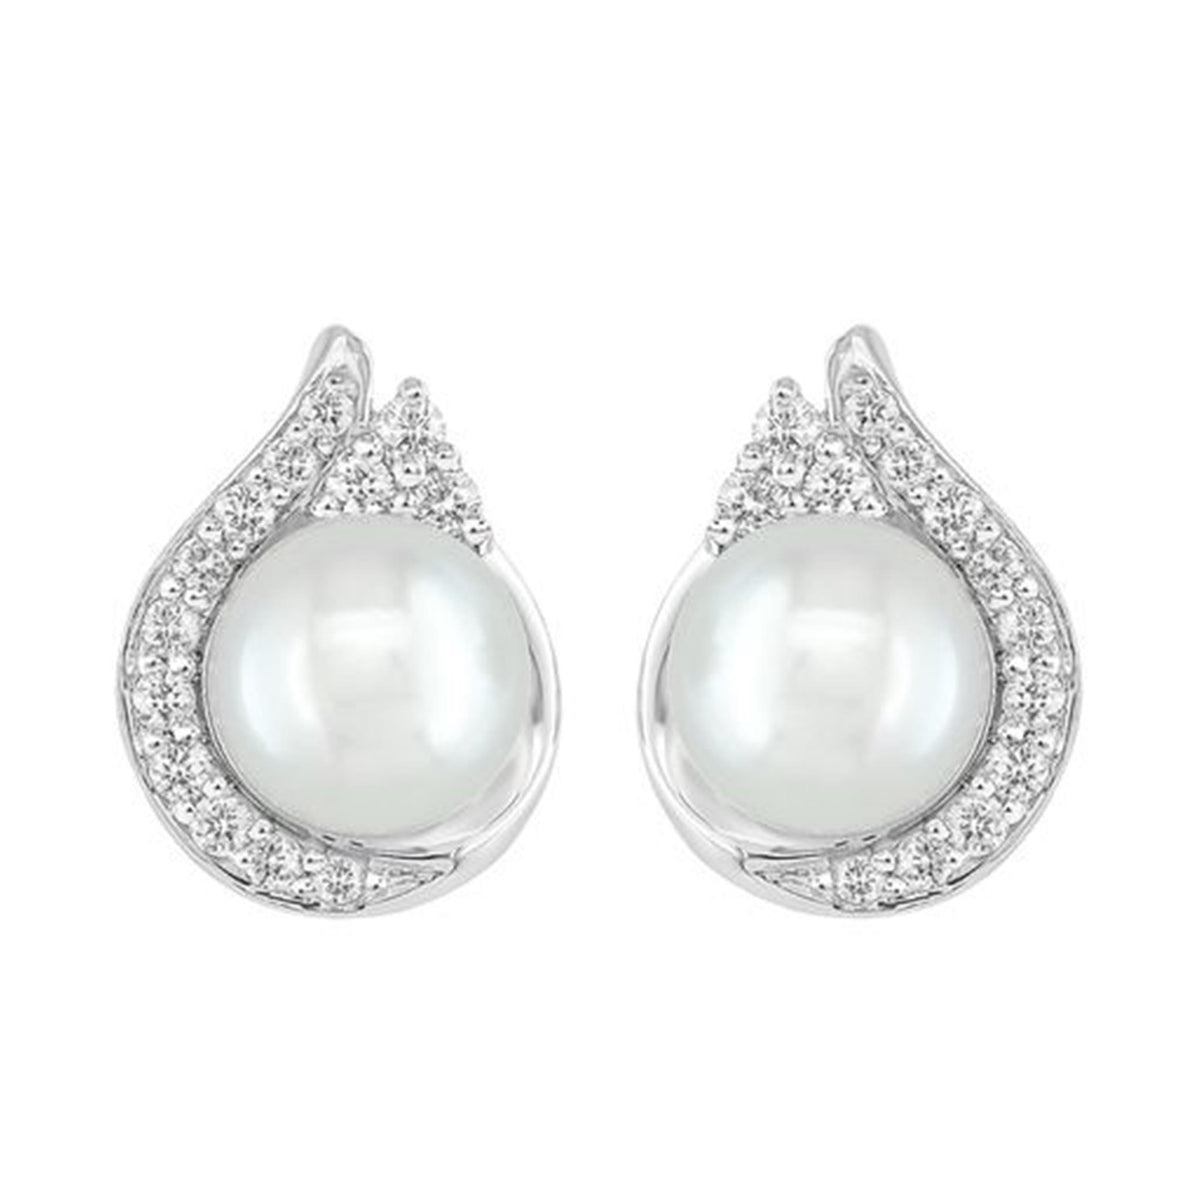 14Kt White Gold Earrings With 6mm Akoya Cultured Pearl